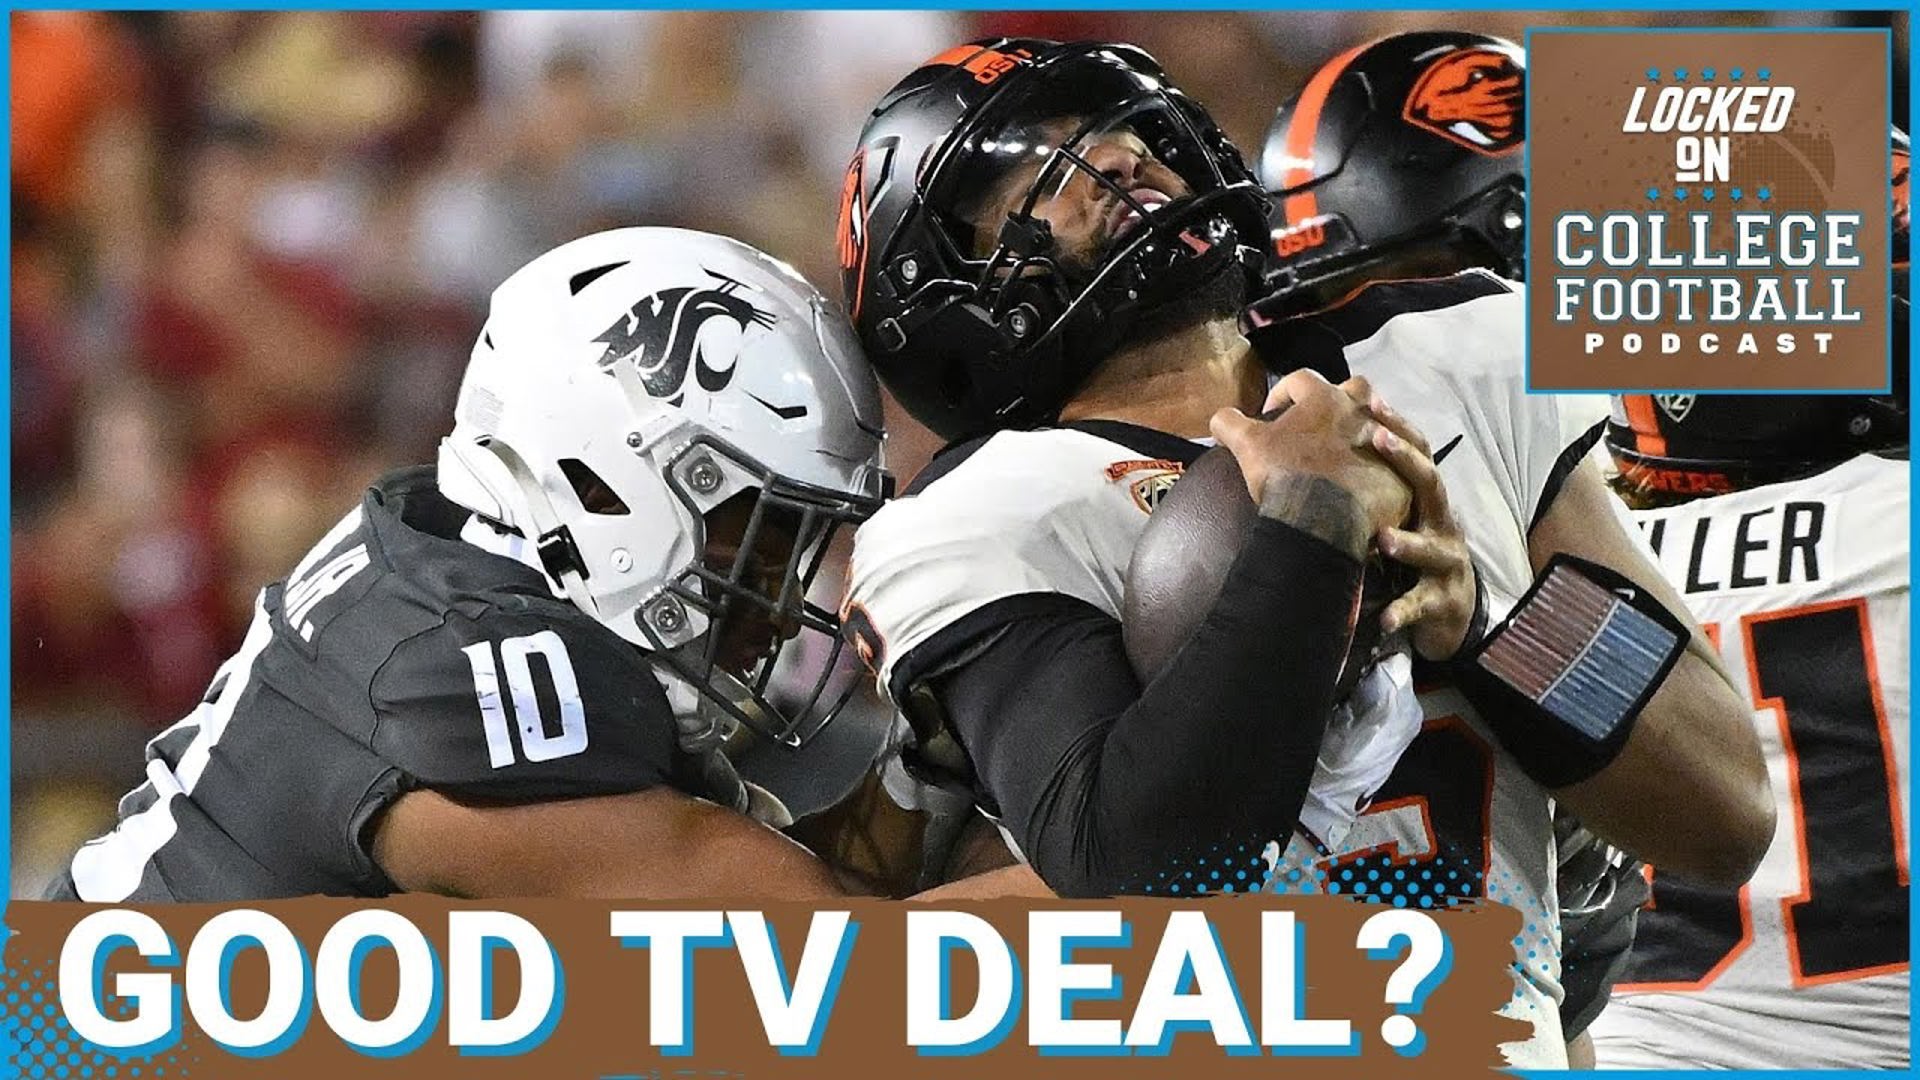 Oregon State and Washington State are reportedly going to air their home football games on The CW this Fall, with a couple of select games on FOX as well.